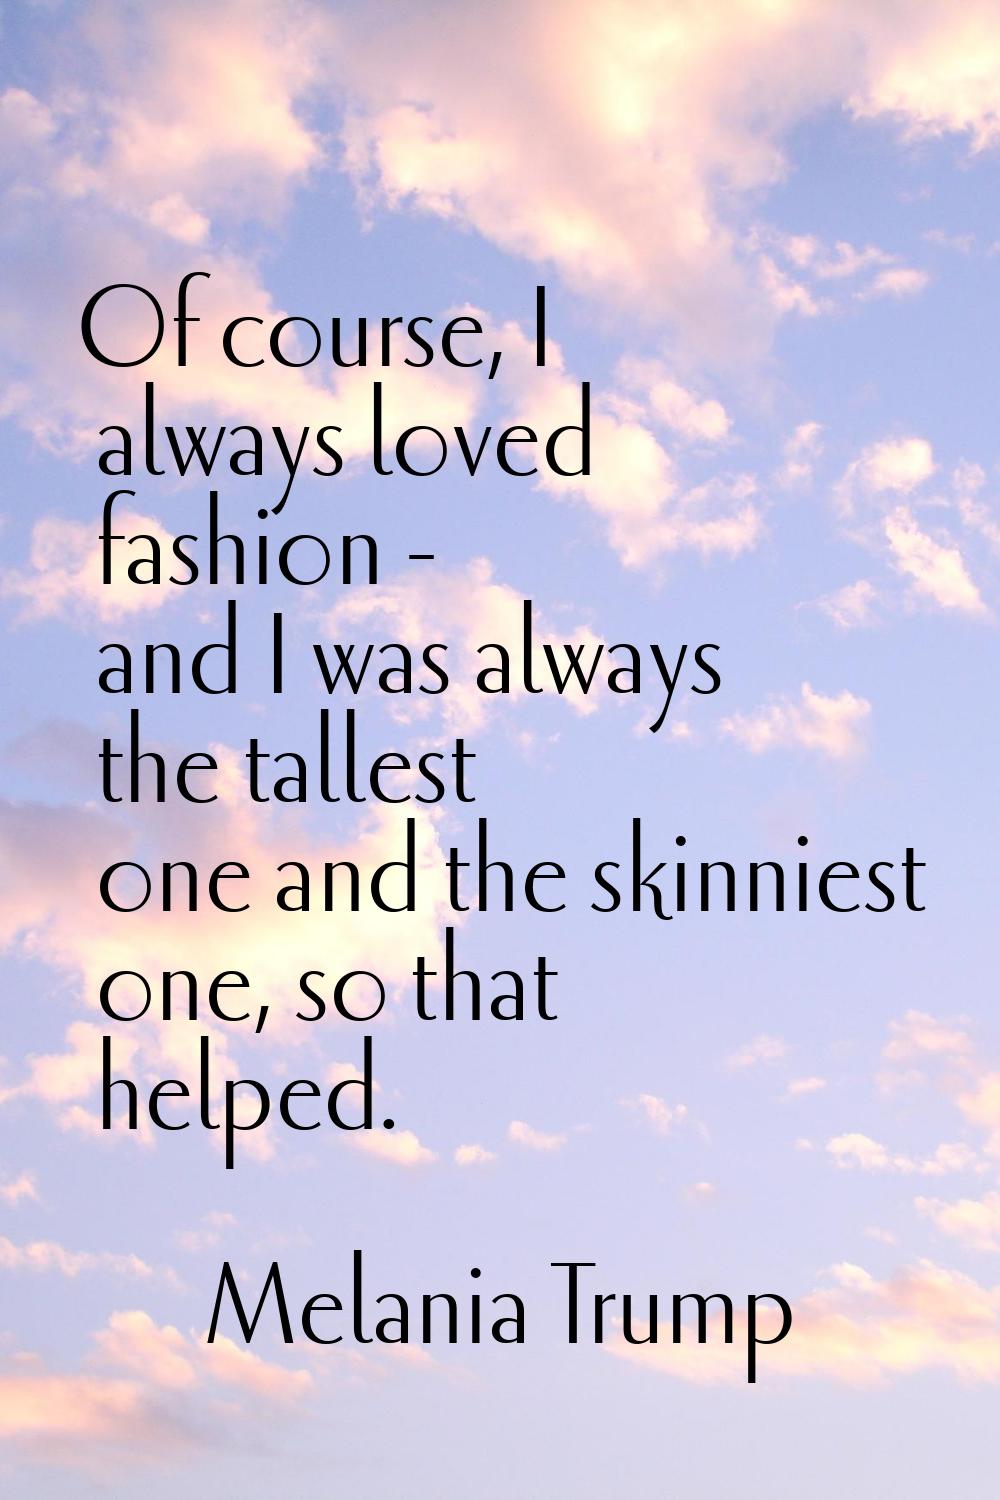 Of course, I always loved fashion - and I was always the tallest one and the skinniest one, so that